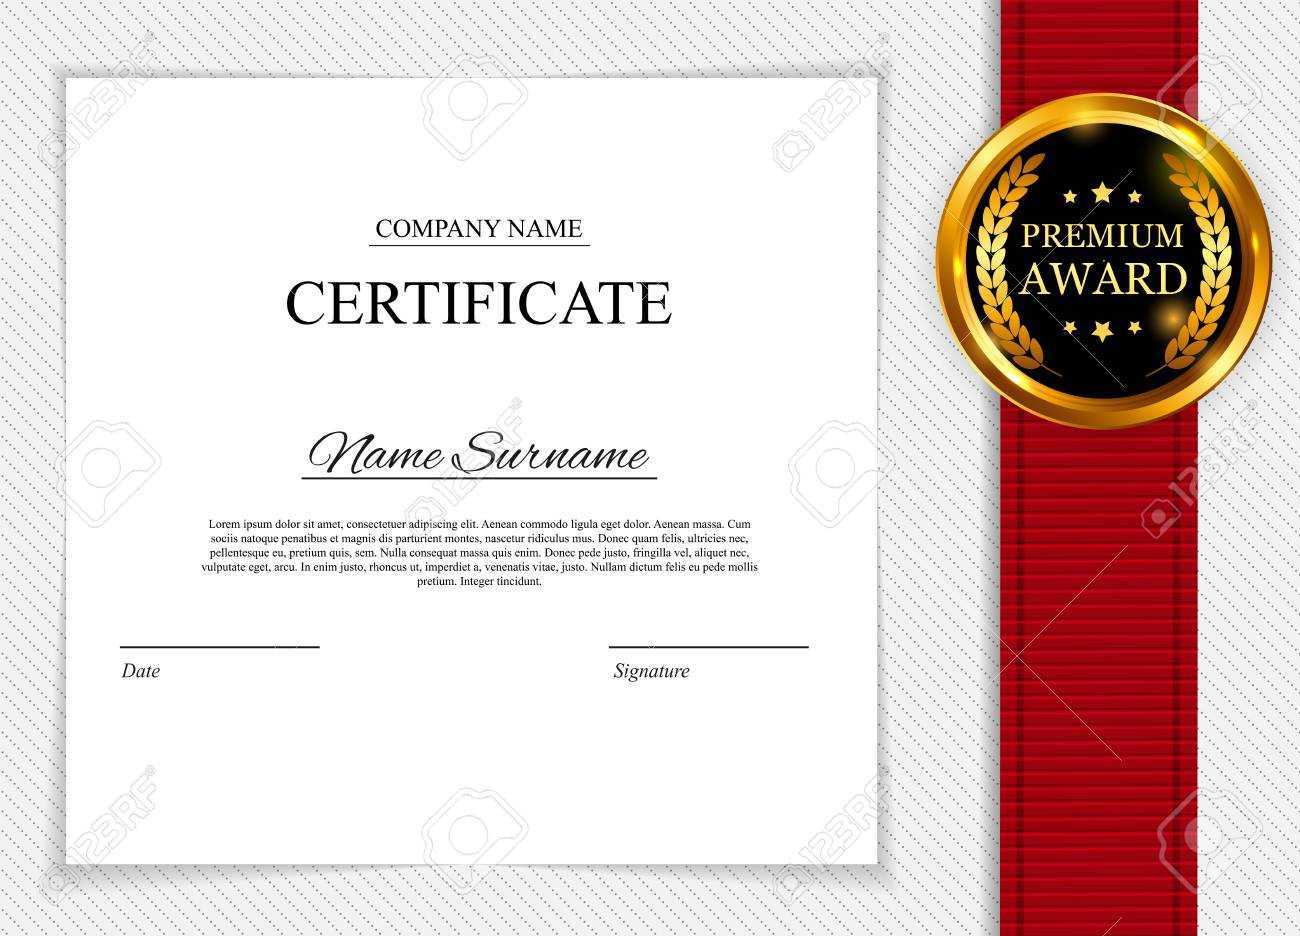 Stock Illustration Intended For Blank Share Certificate Template Free